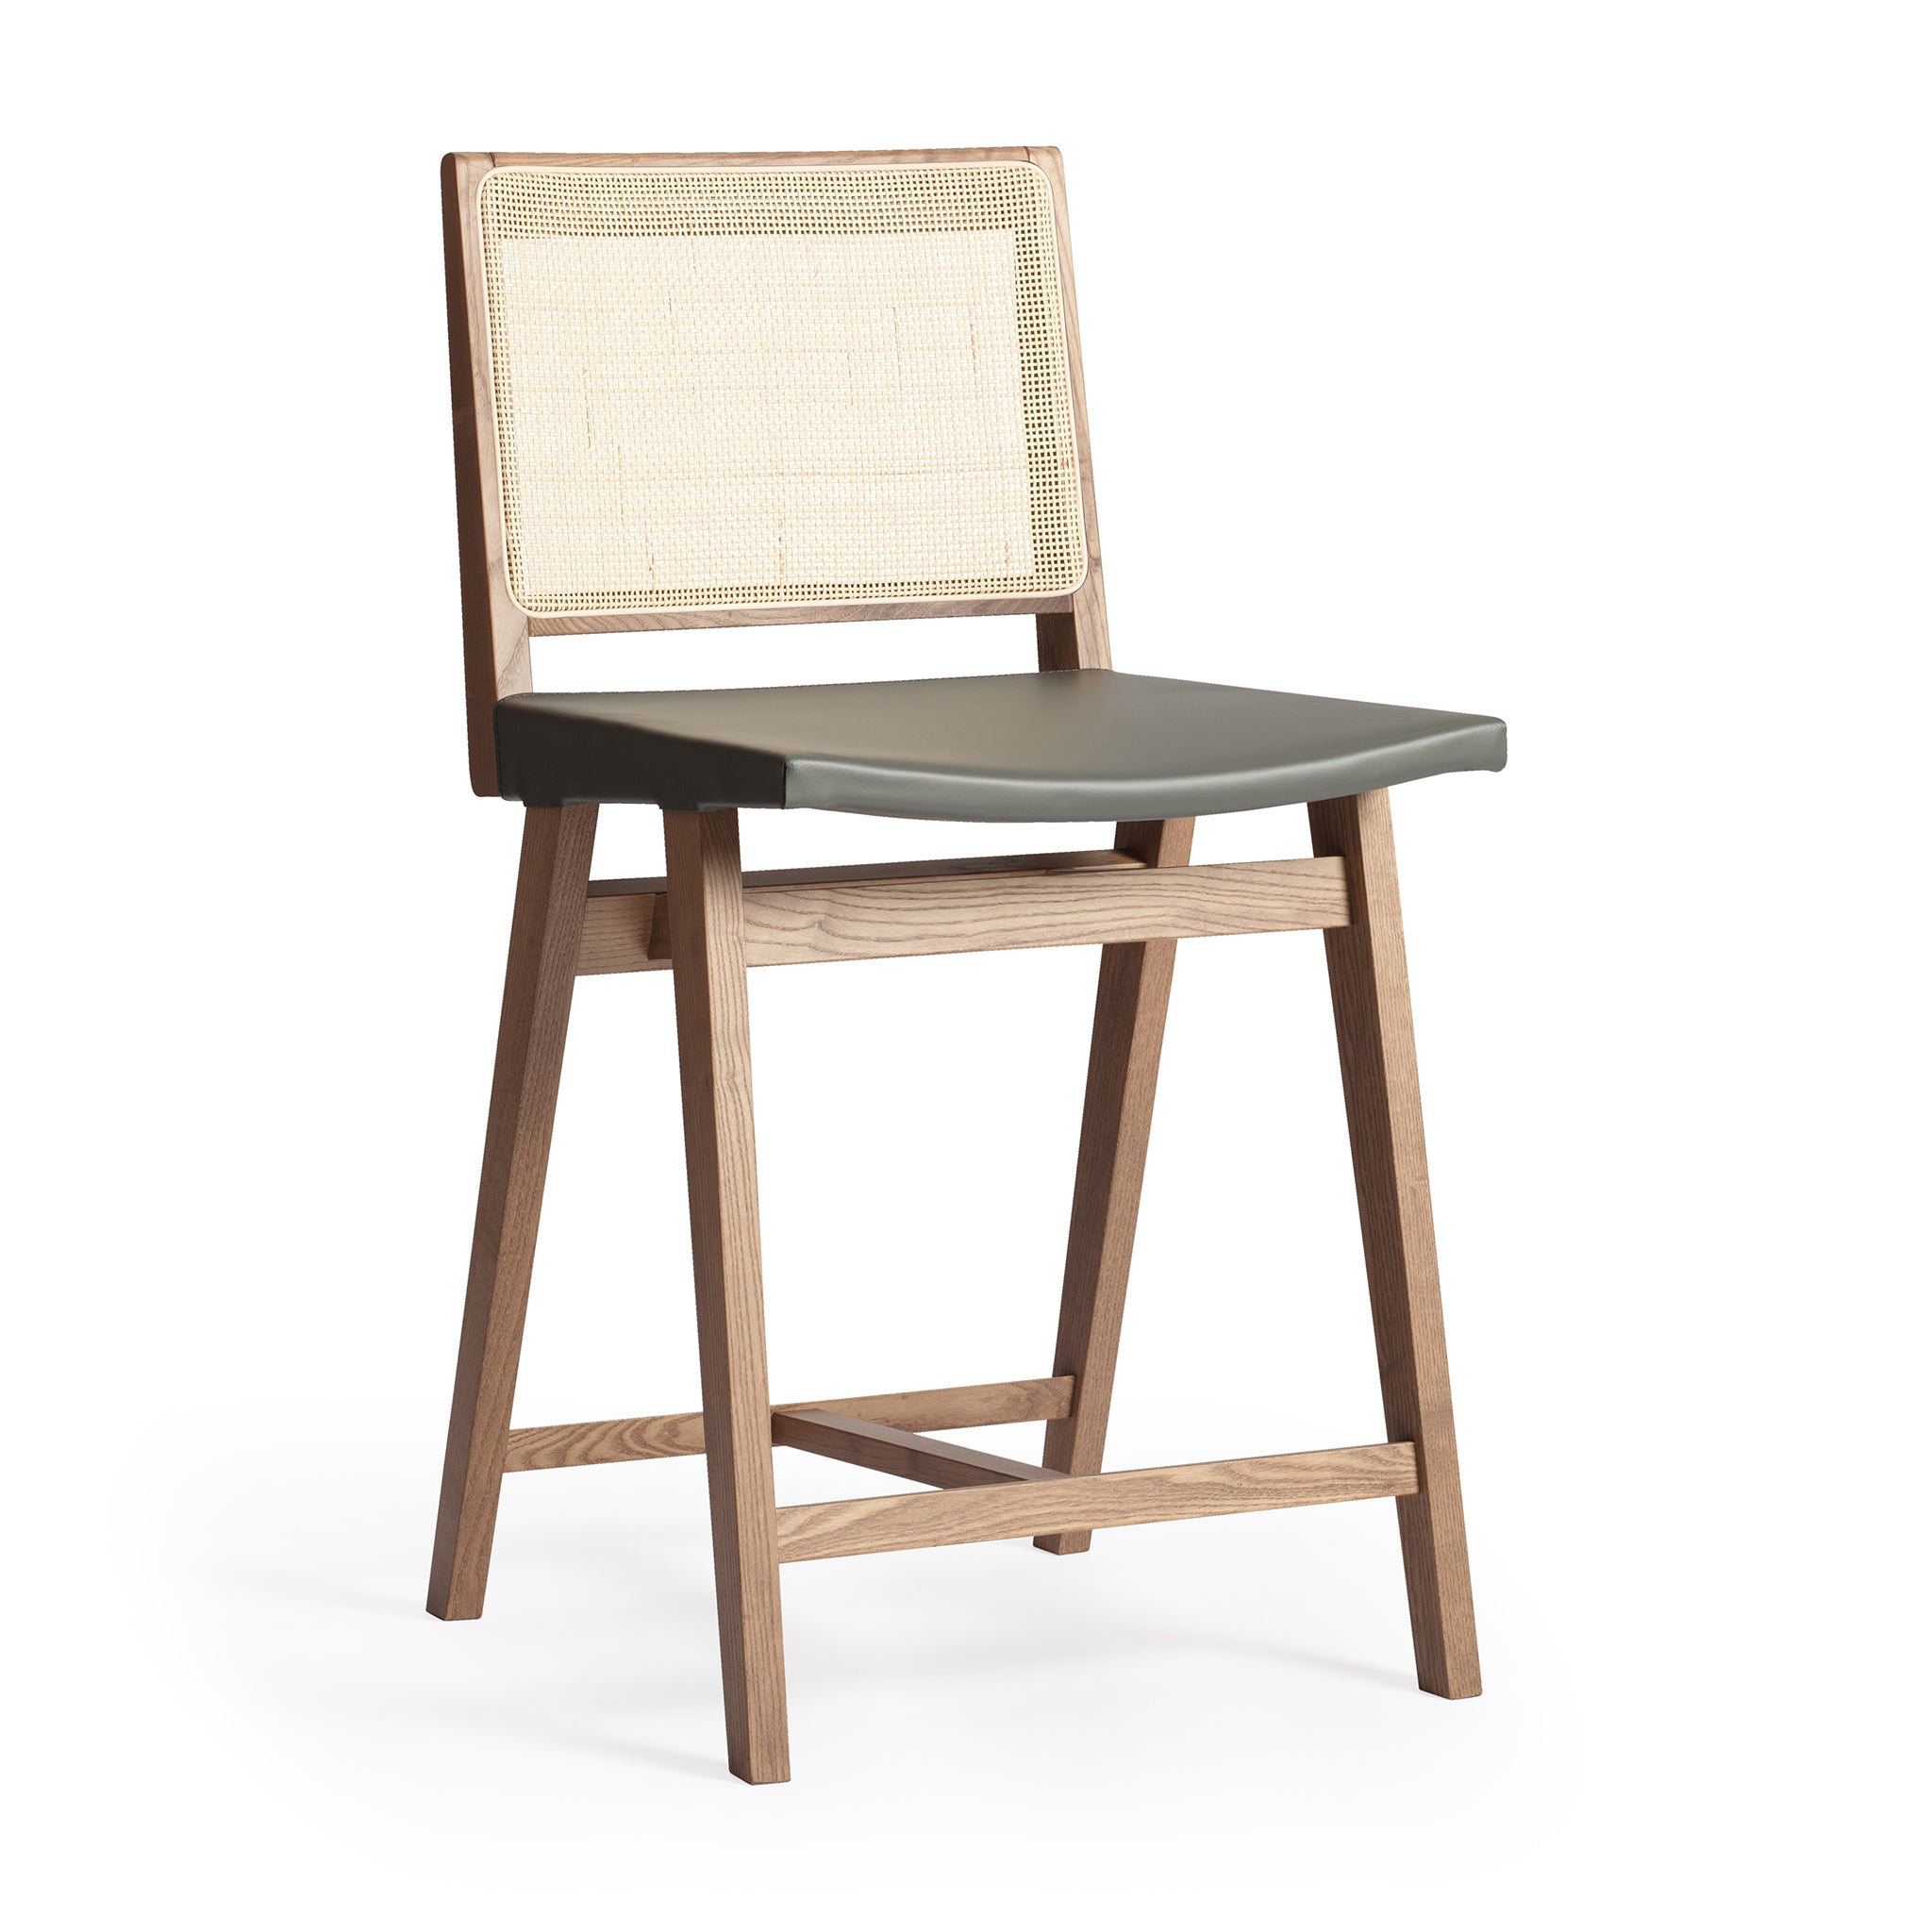 Main view of an Elye modern kitchen counter stool, walnut stained ash frame, square weave cane back, contract grade gray leather seat, produced by Klarel in Italy. #K43-2